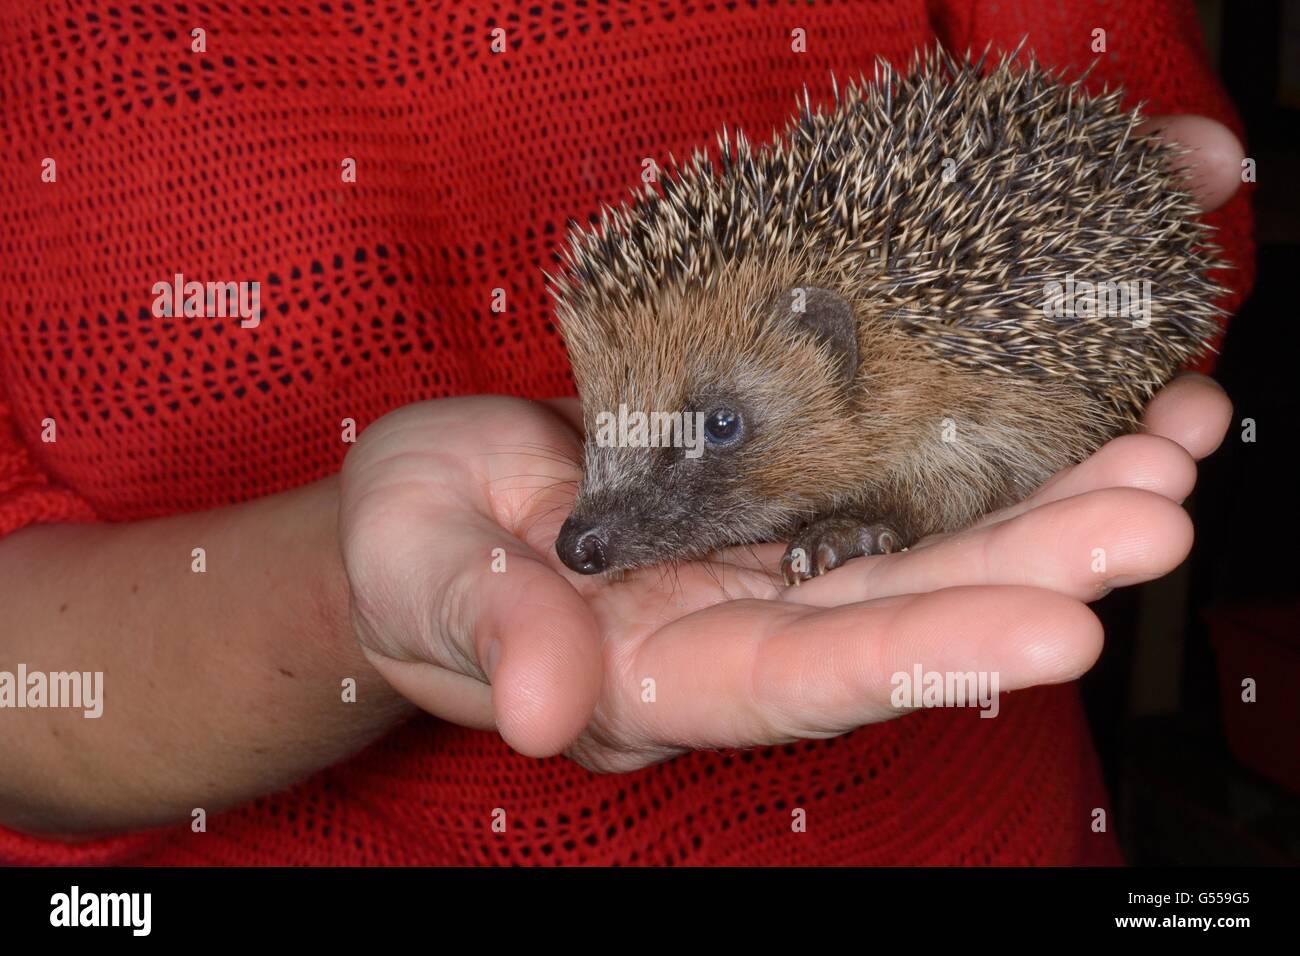 Animal Rescue Centre High Resolution Stock Photography and Images - Alamy